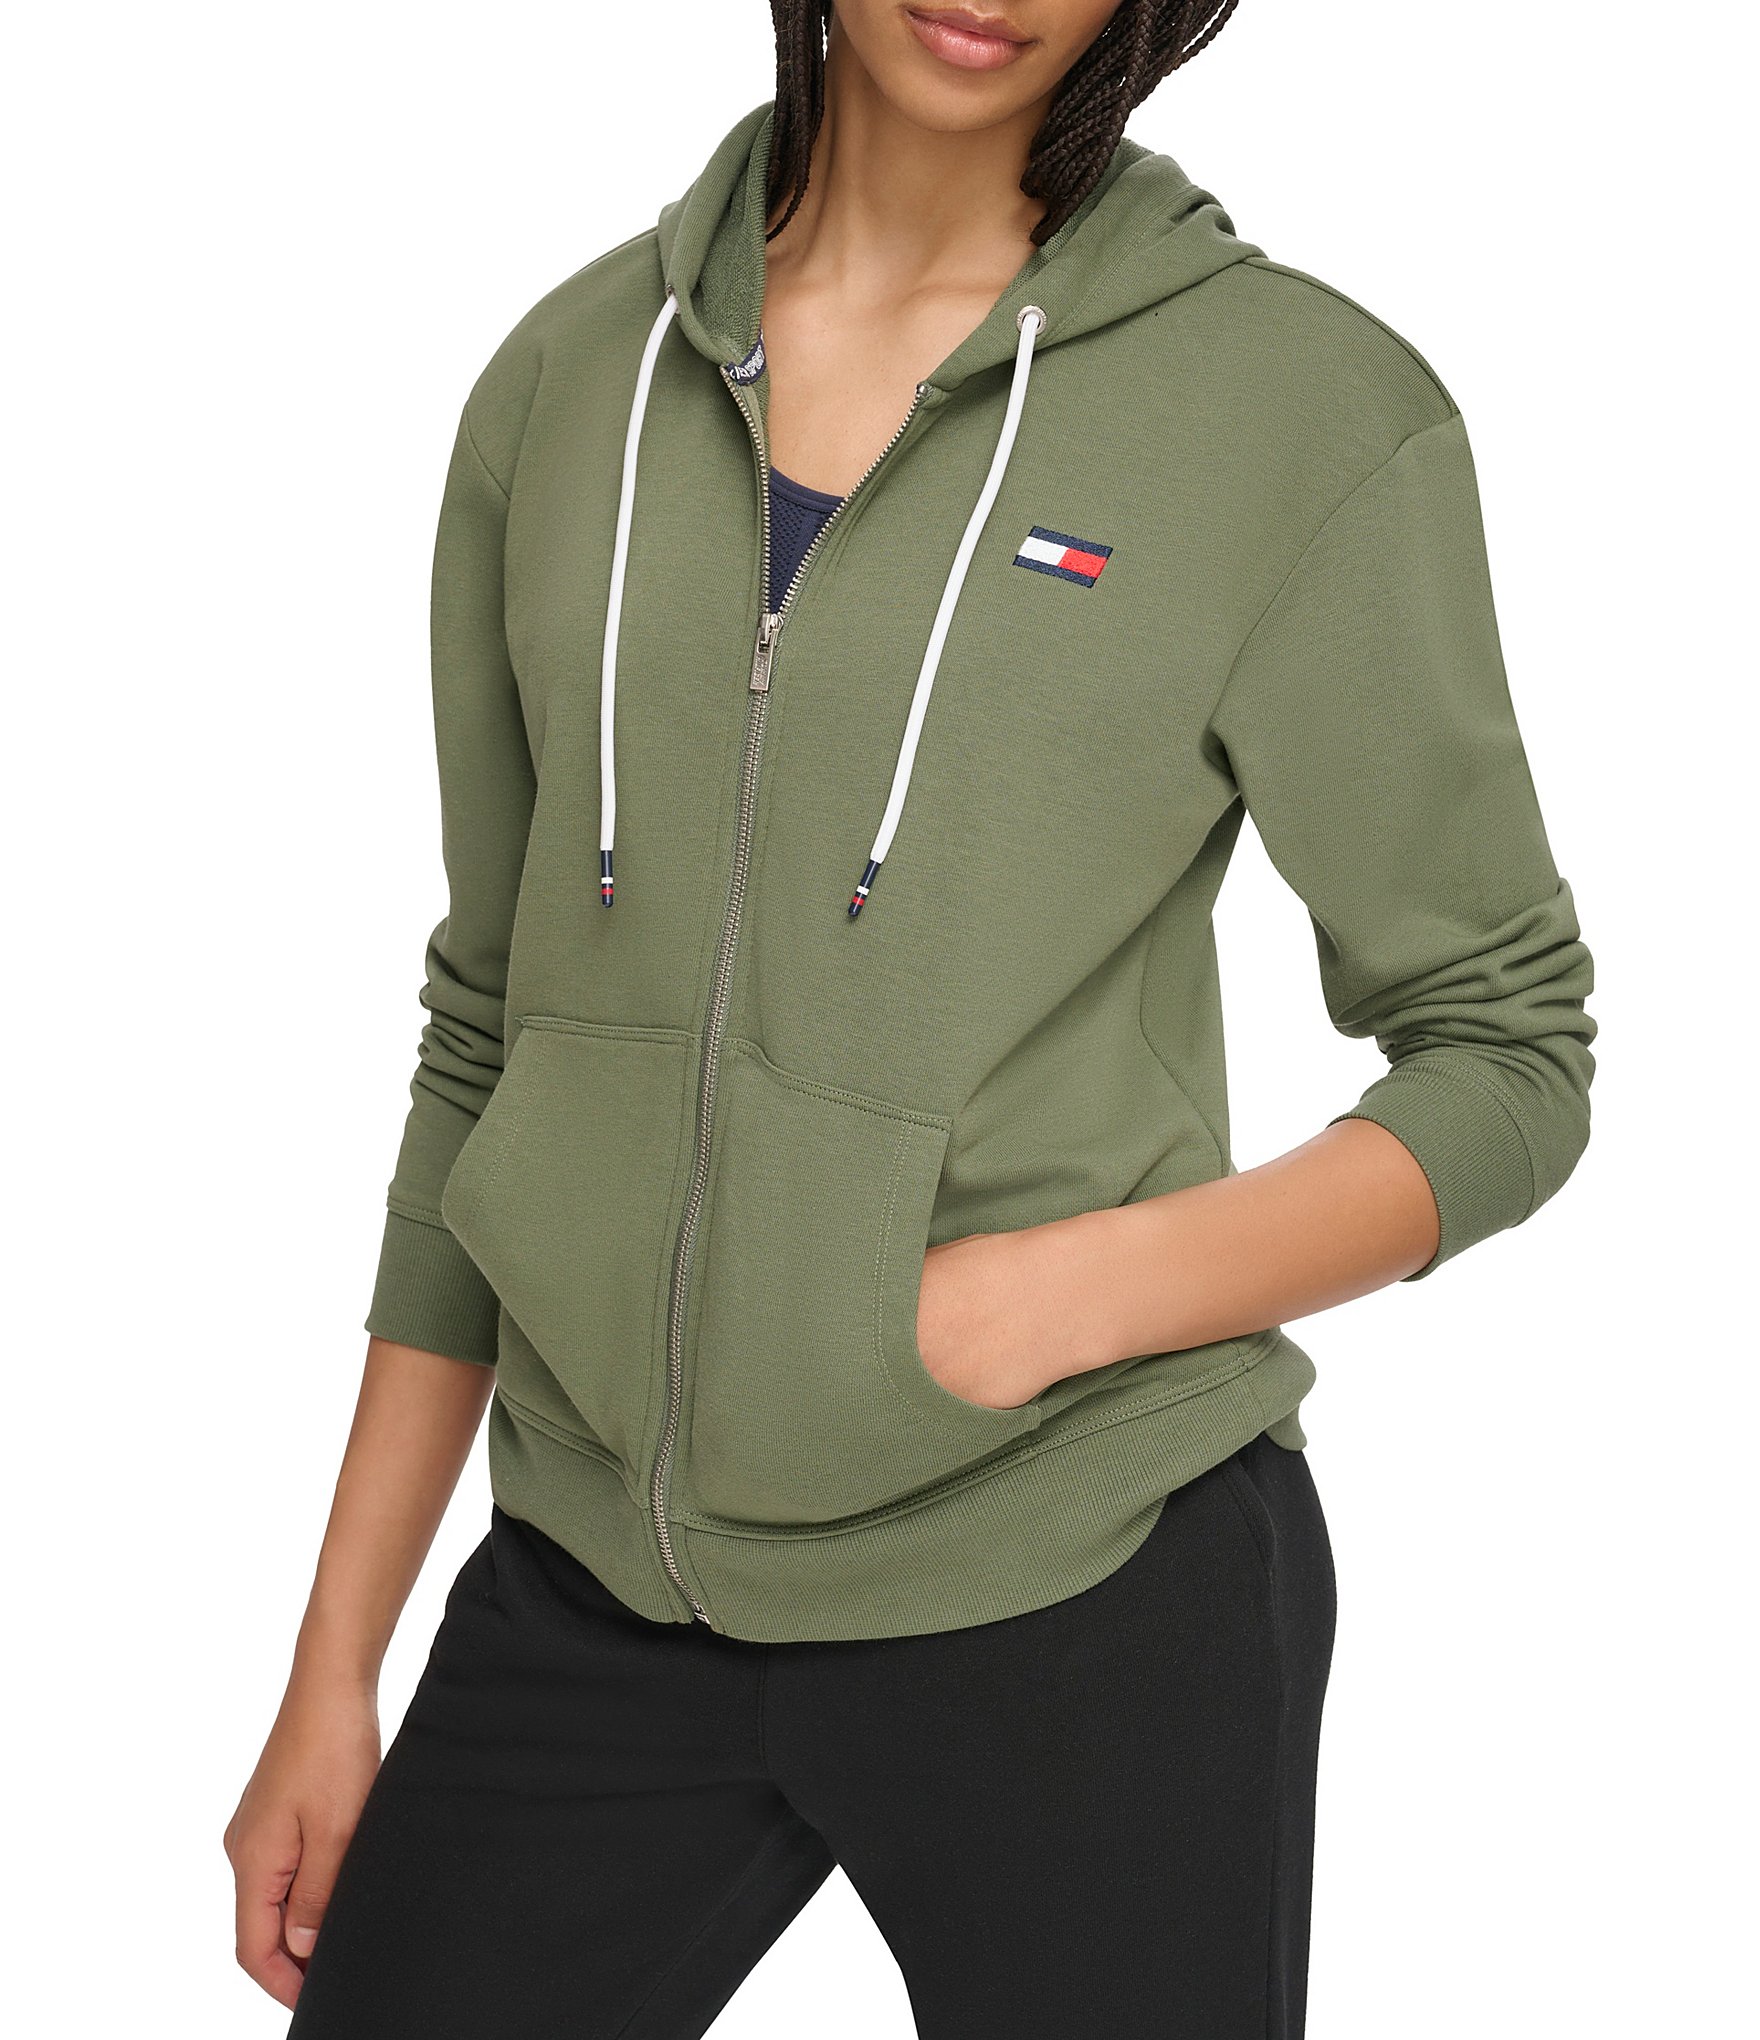 Tommy Hilfiger - relaxed fit arched hilfiger imd sweatshirt - women -  dstore online